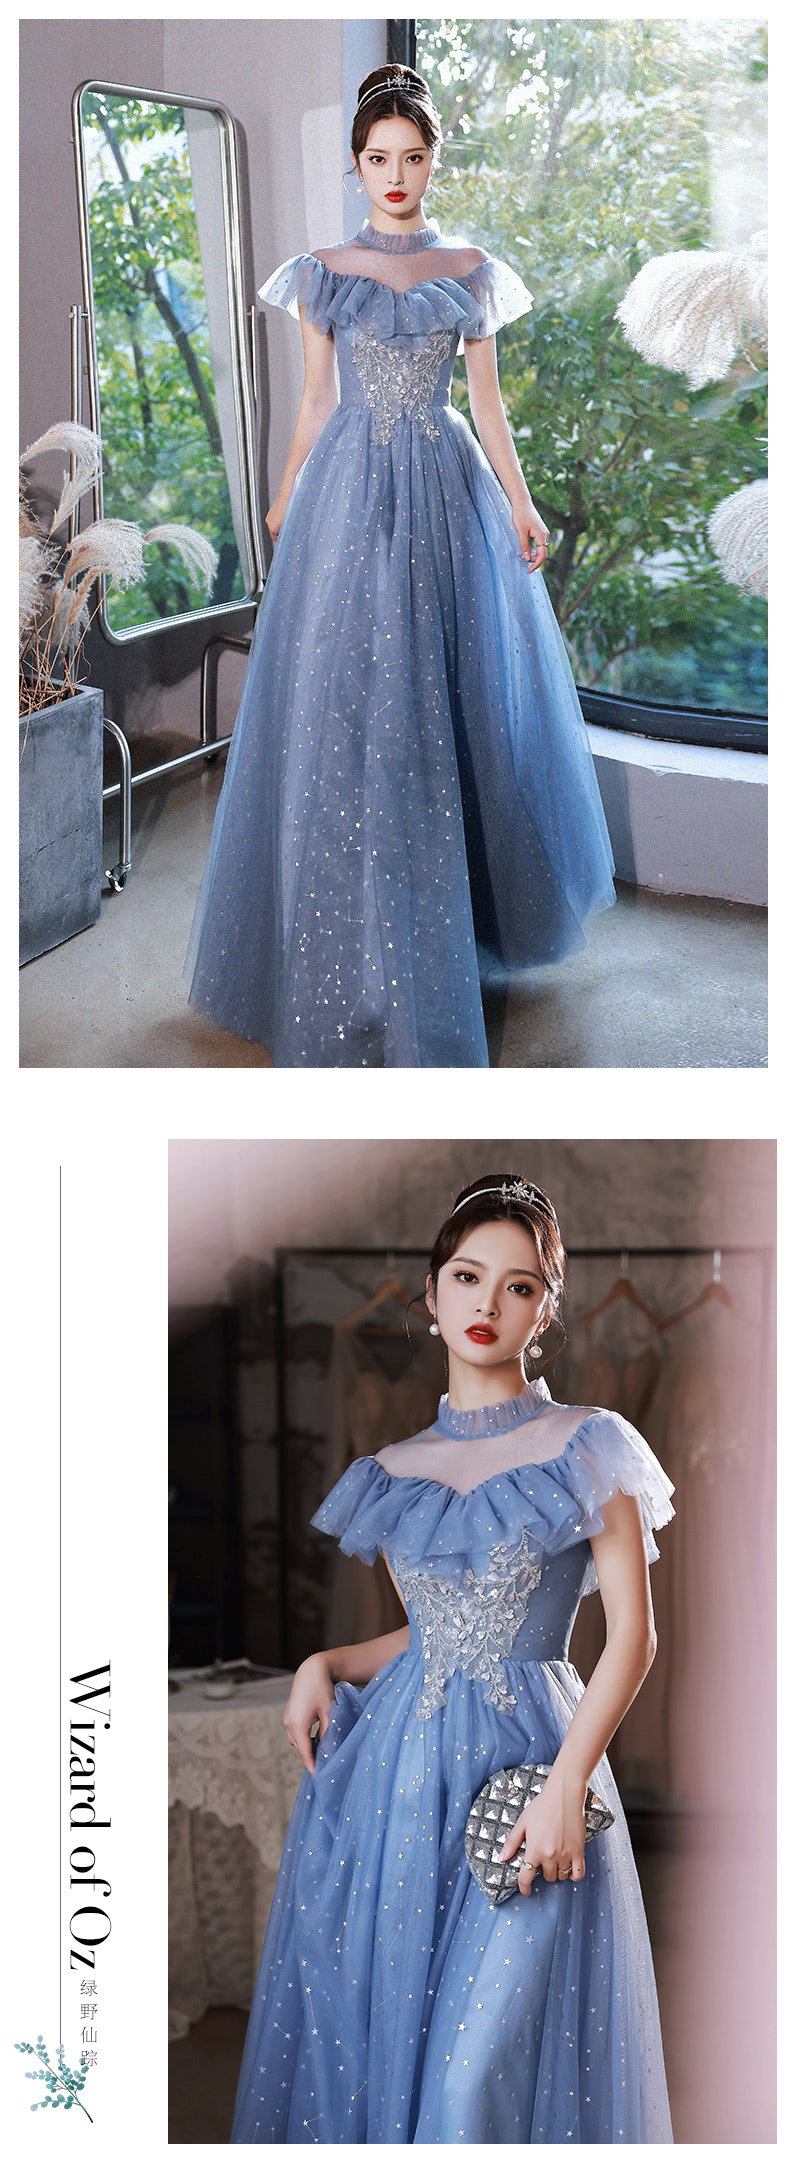 Fashion-Off-the-Shoulder-Long-Blue-Cocktail-Party-Prom-Dress15.jpg